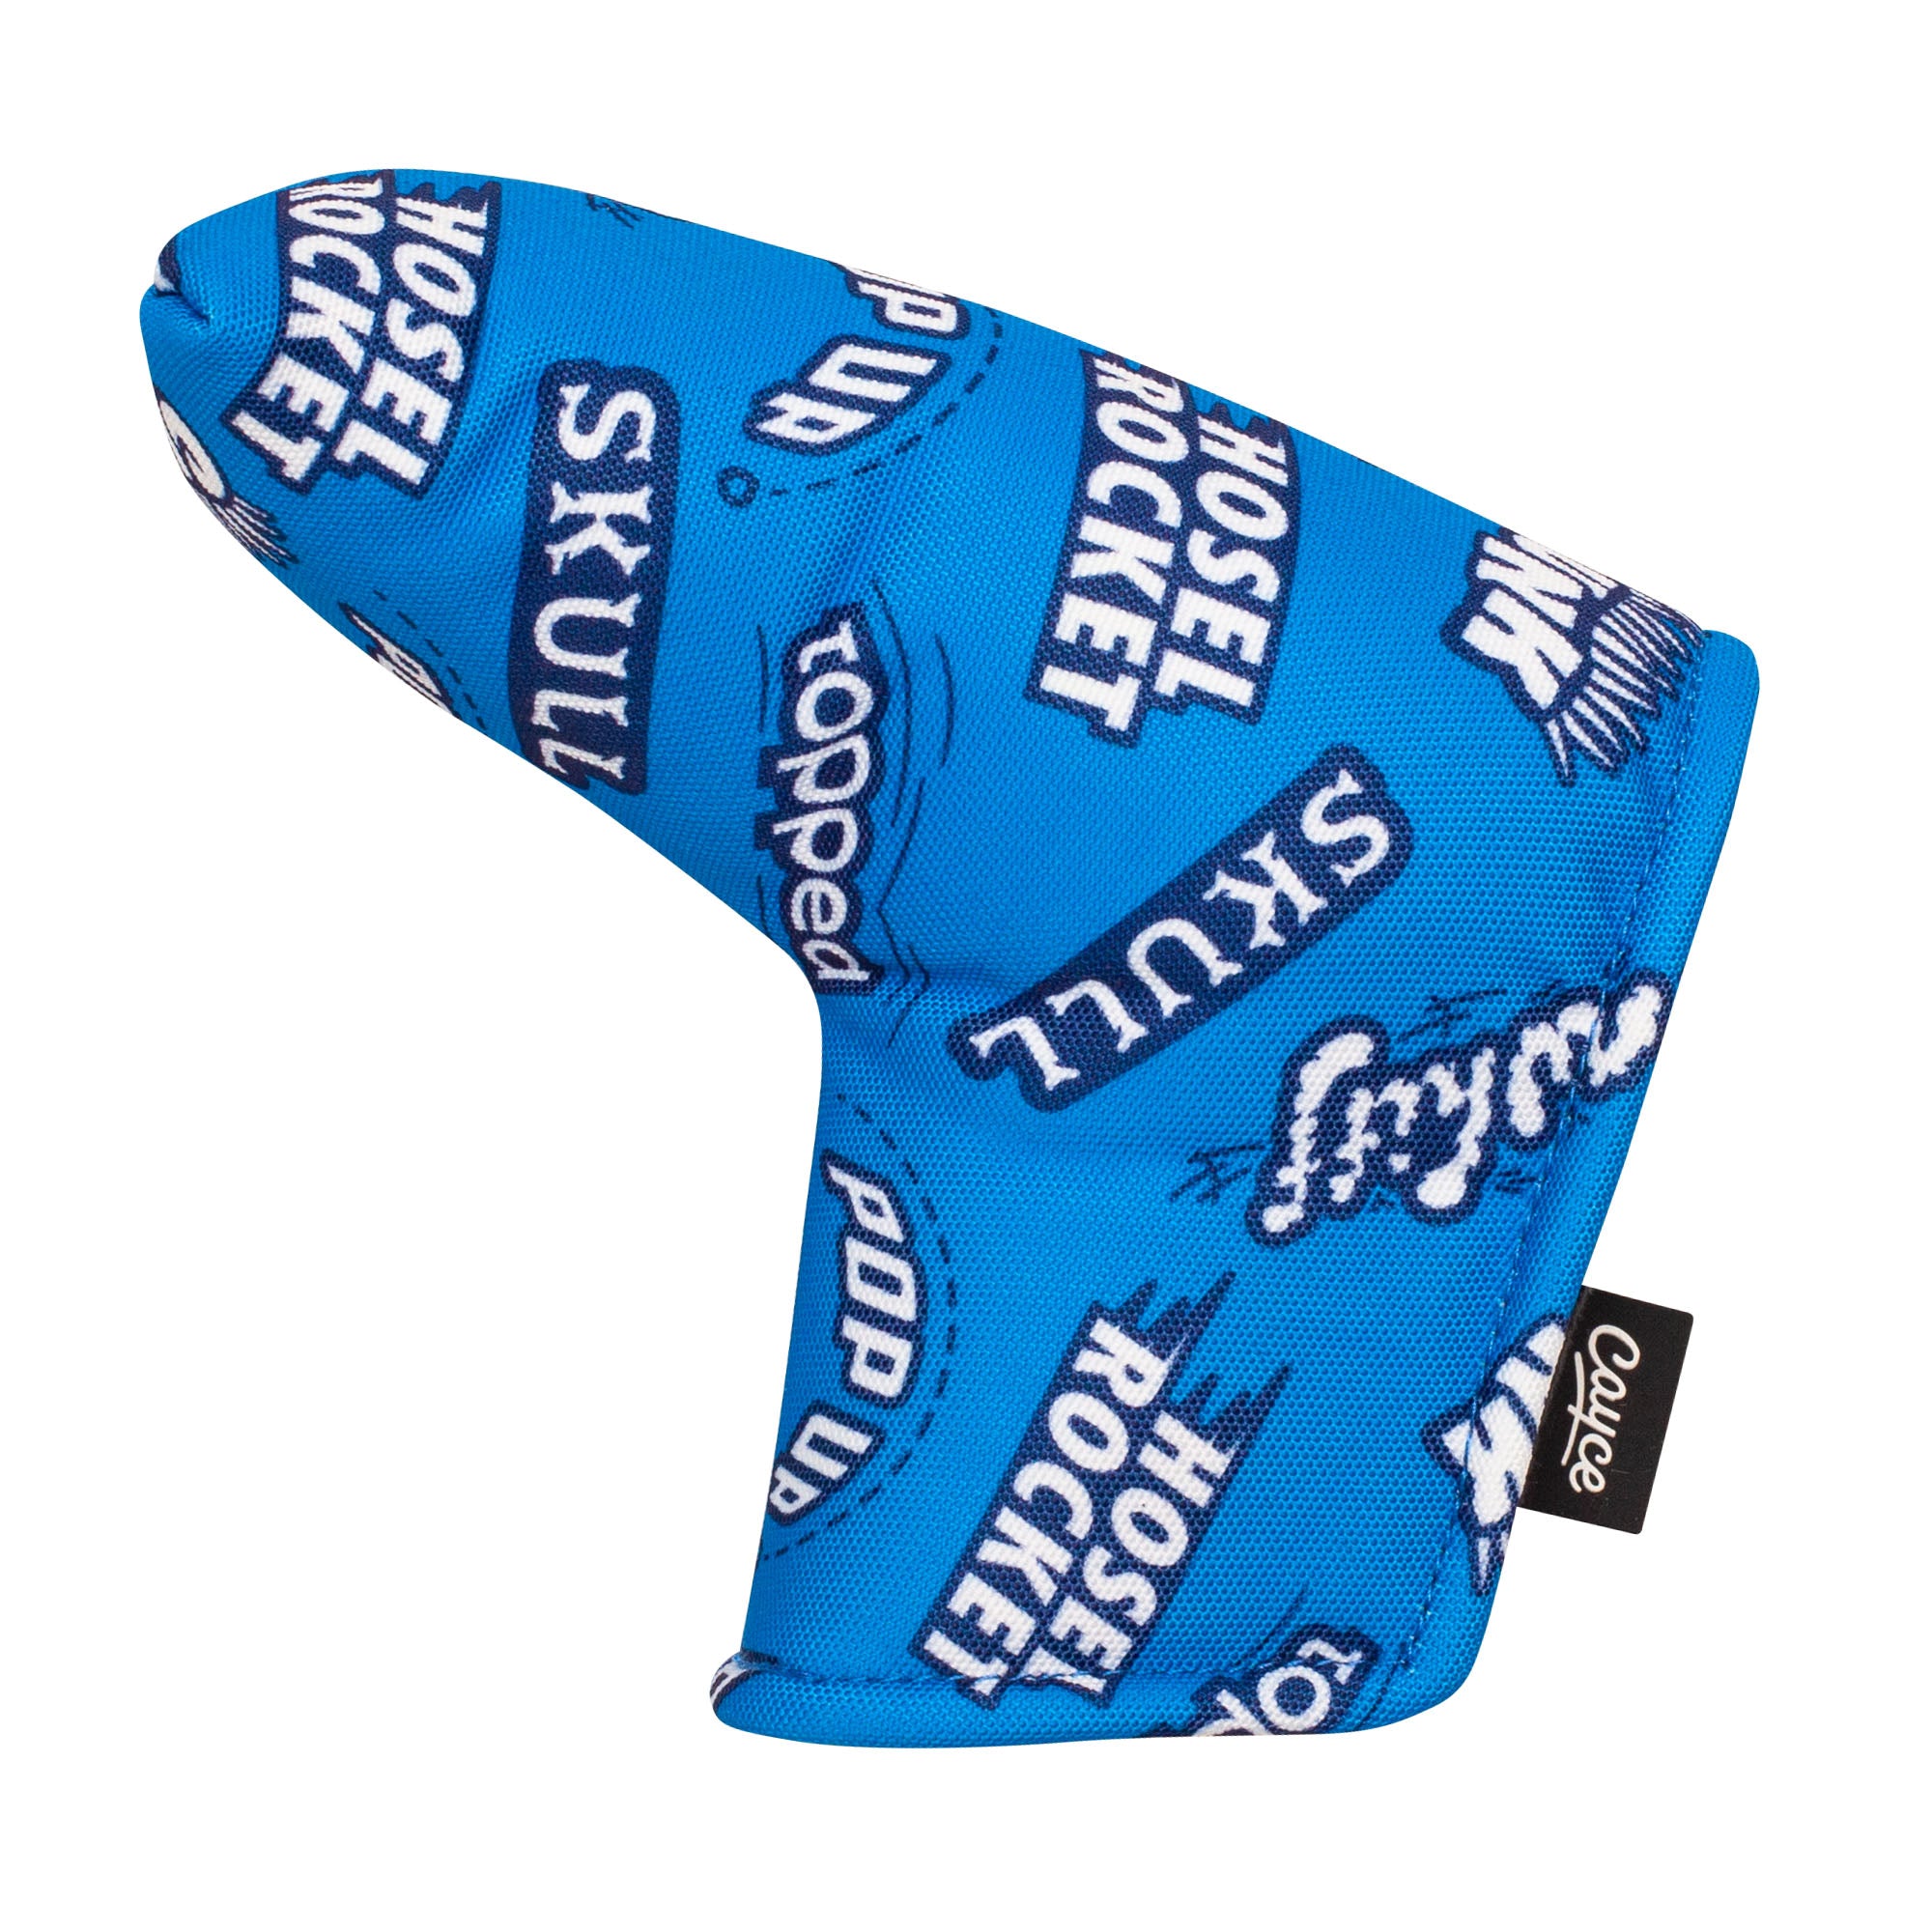 Bad Shots Putter Cover